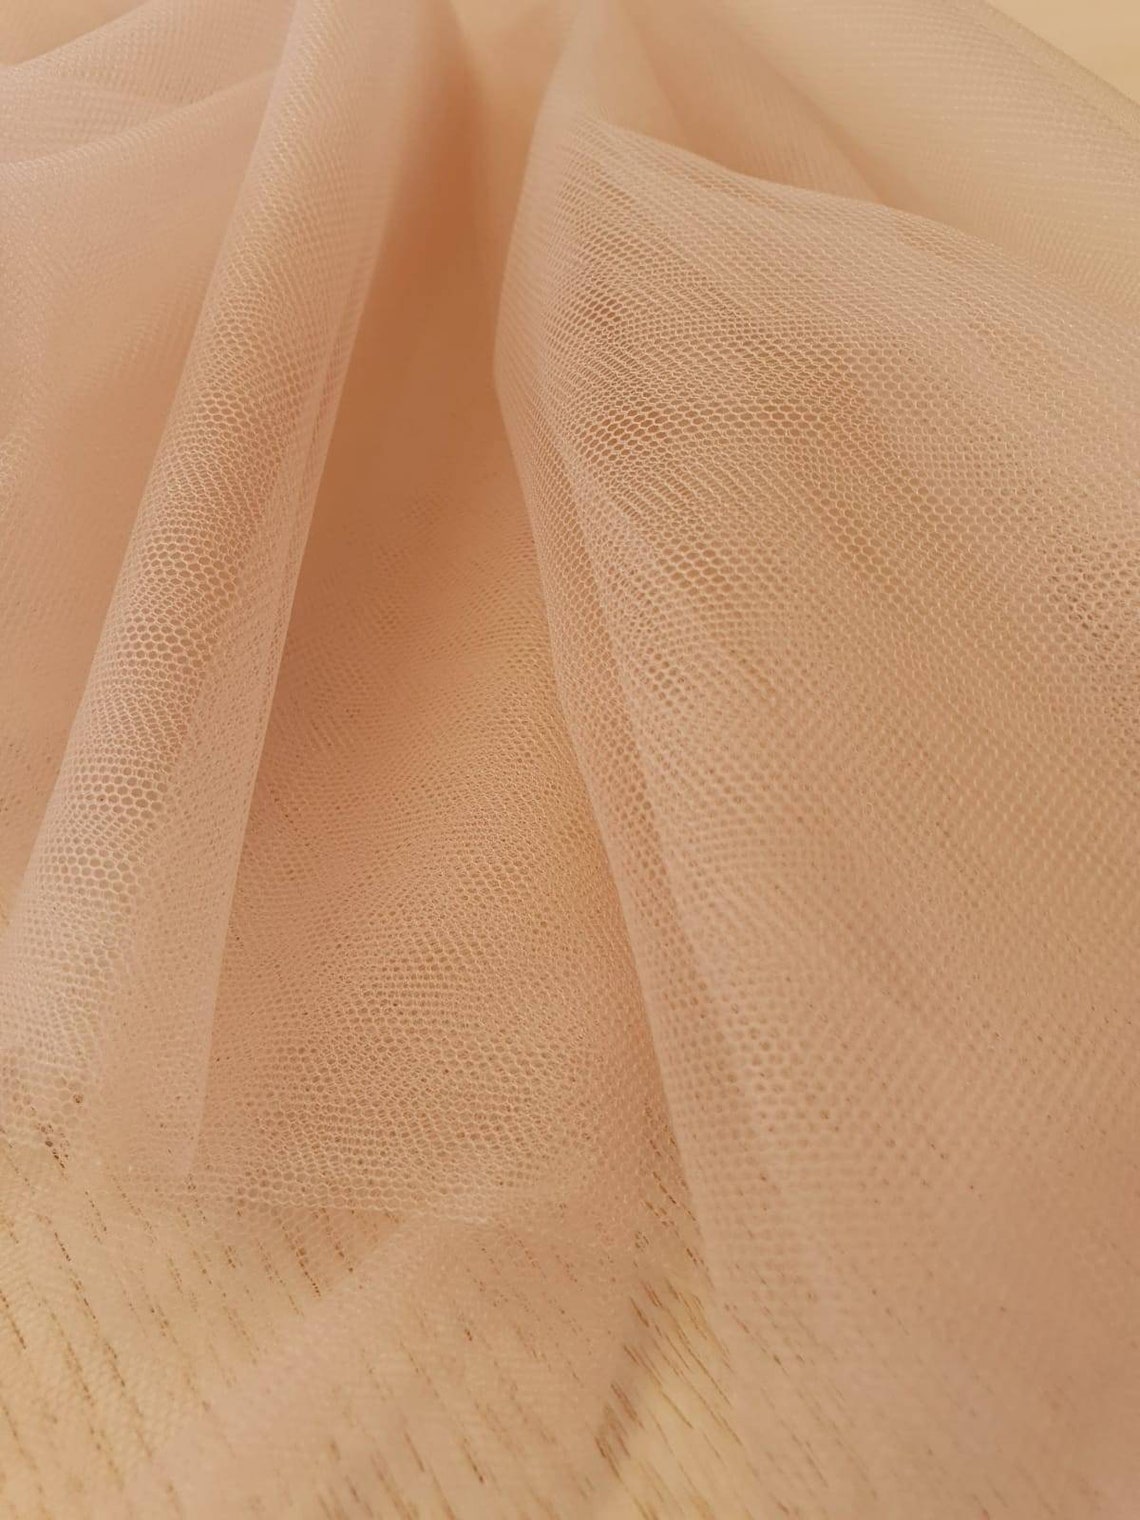 Nude Tulle Fabric Lingerie Nude Net Nude Color Fabric Etsy My Xxx Hot